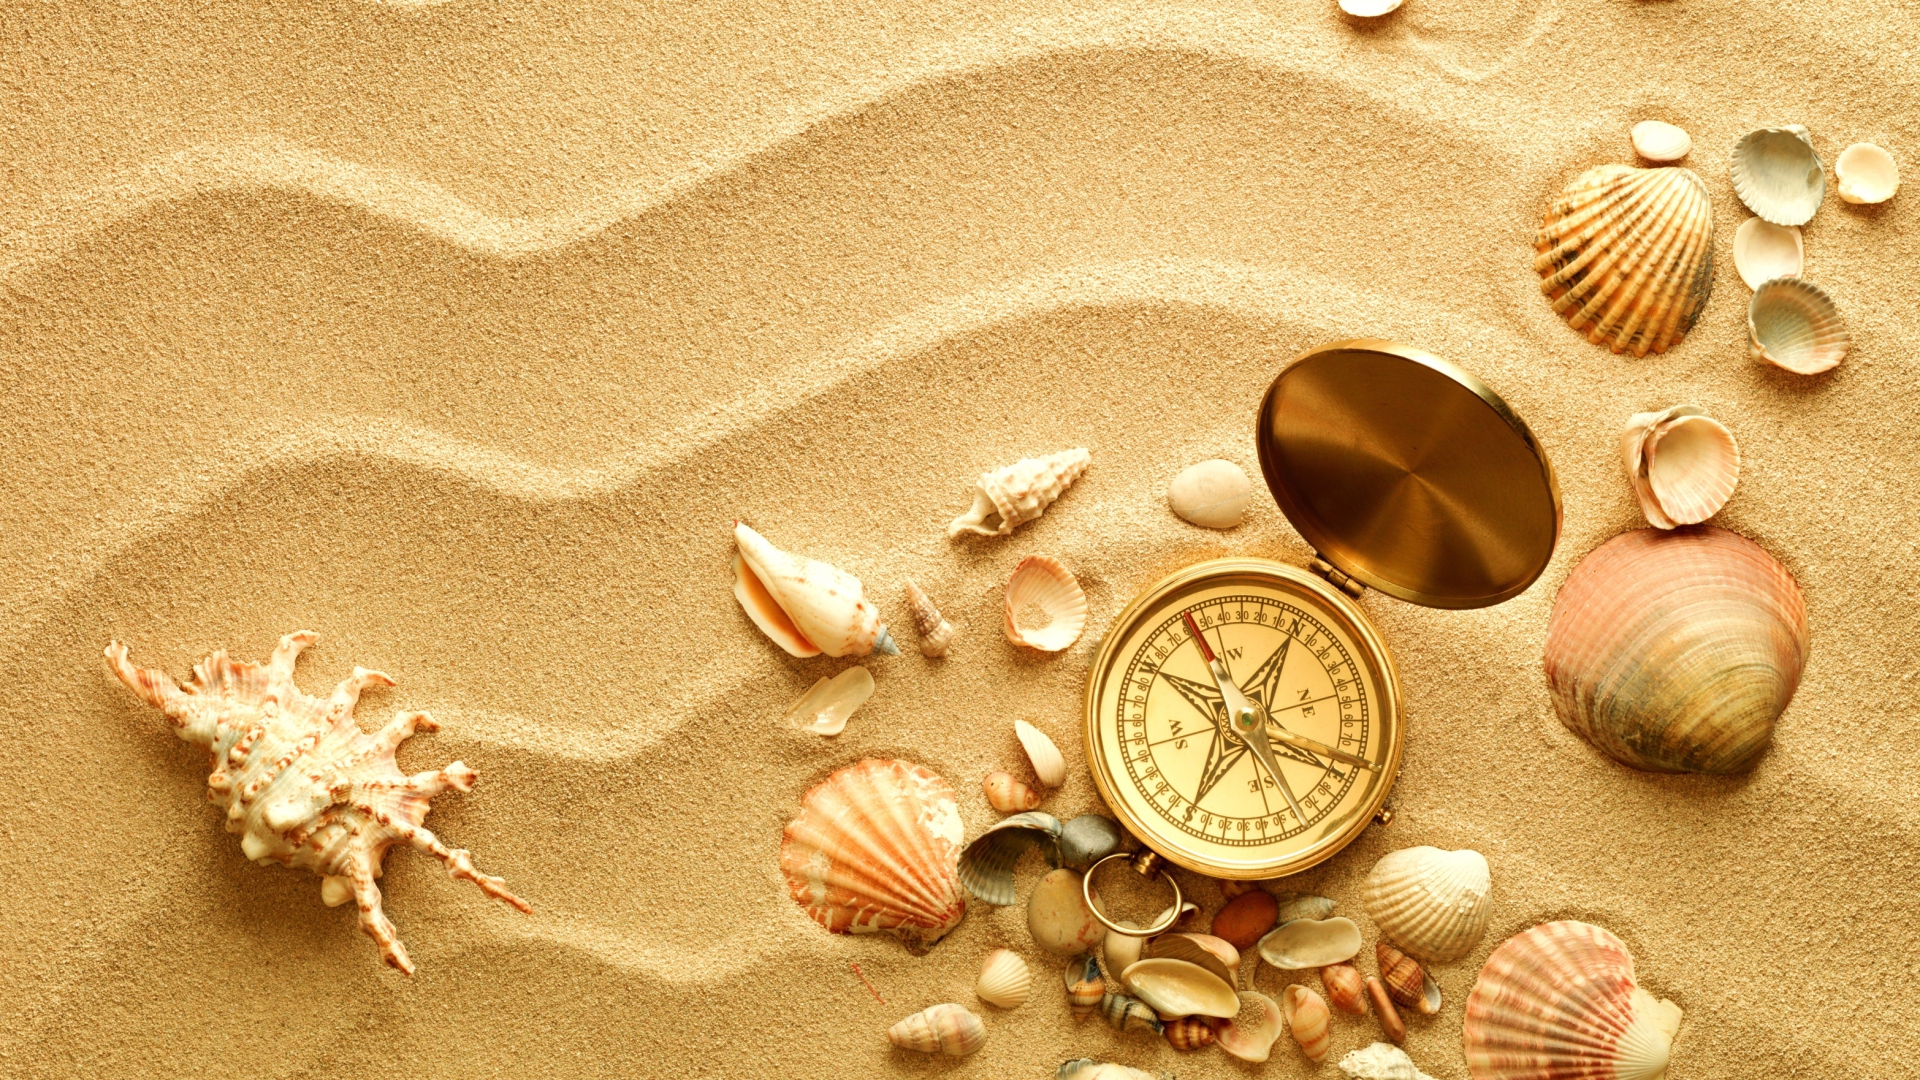 Compass And Shells On Sand wallpaper 1920x1080